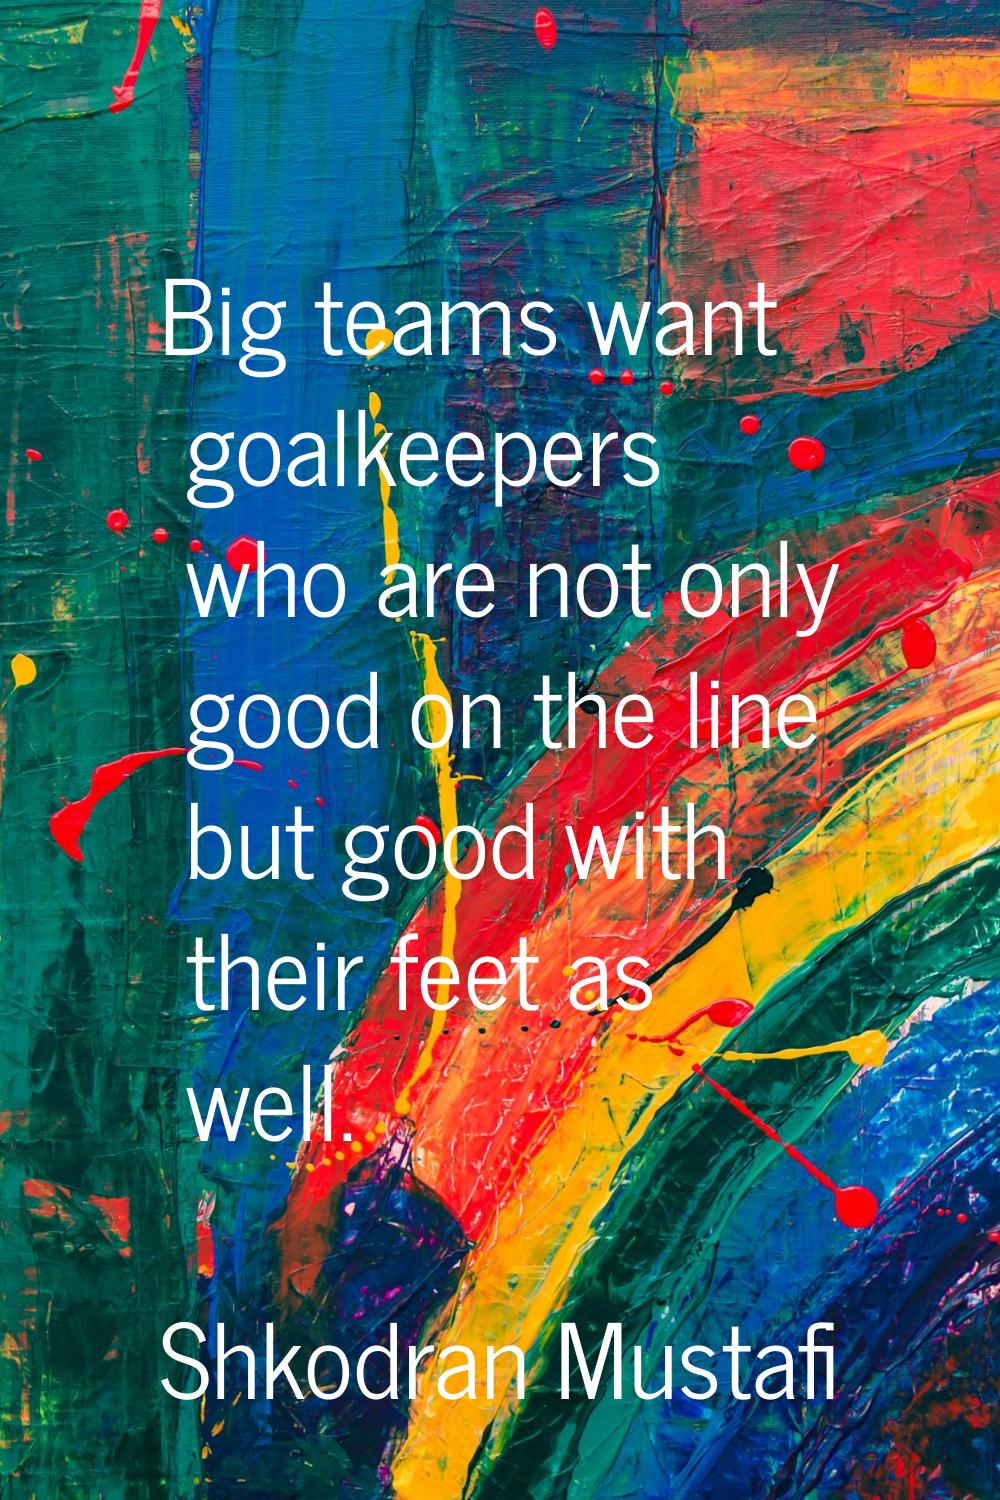 Big teams want goalkeepers who are not only good on the line but good with their feet as well.